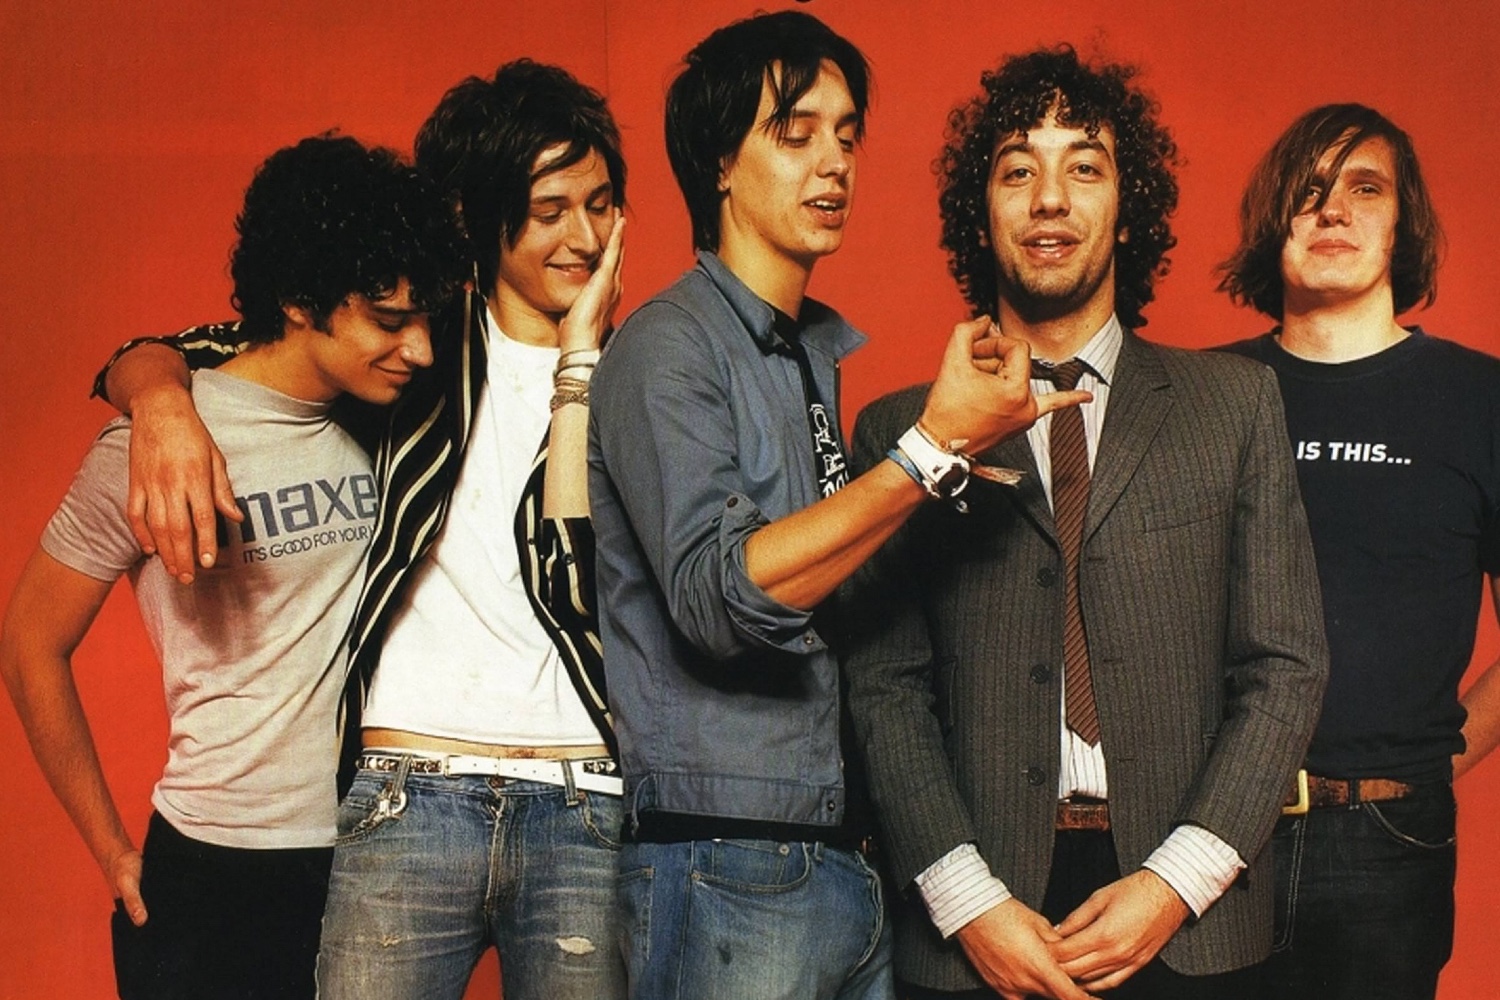 The Strokes: The Singles —Volume 1 Review: The Best 2000s Rock Band Returns  To Their Roots